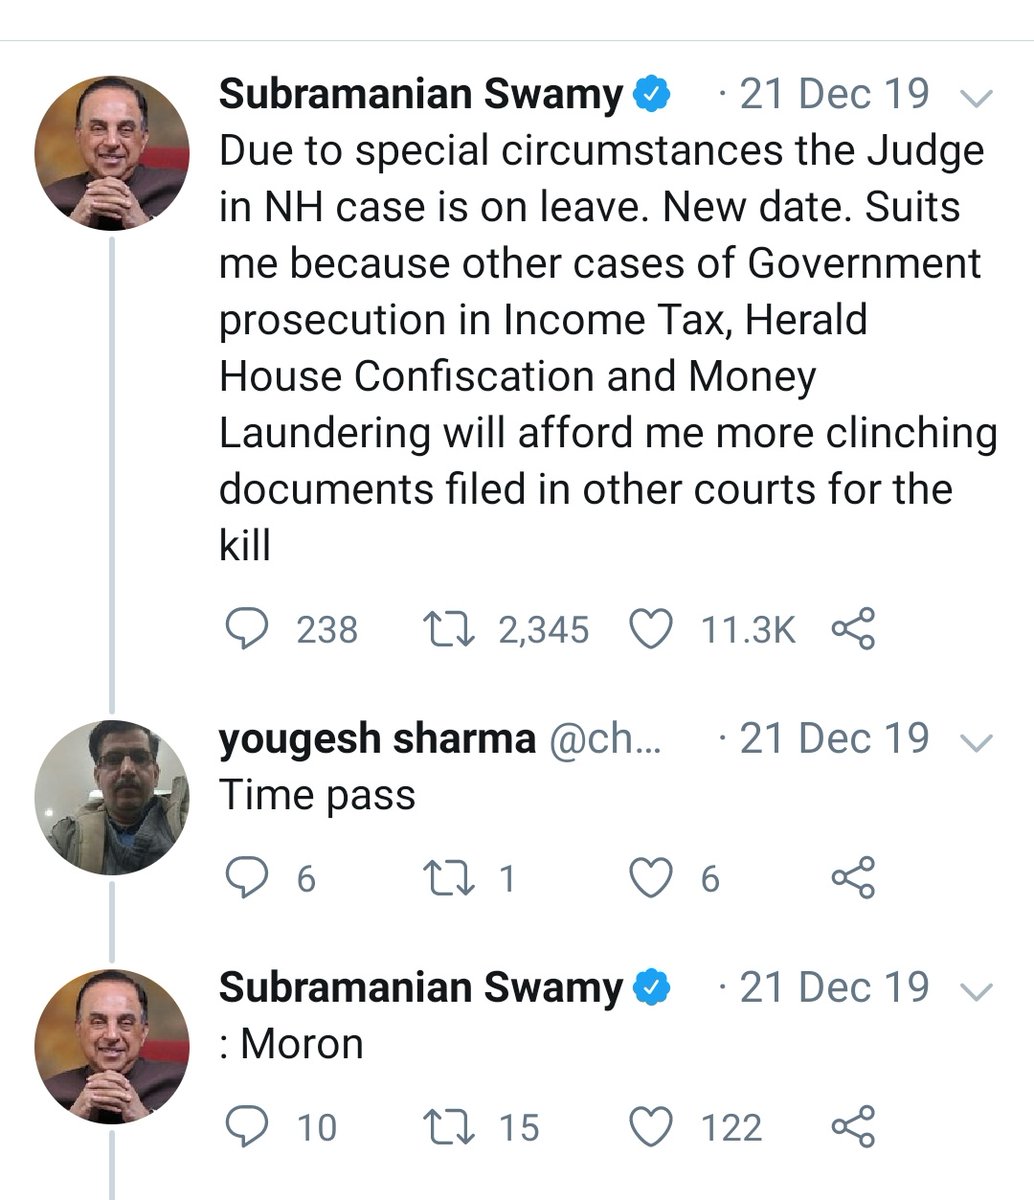 In Dec 2019, Swamy has happy that hearing in National Herald case has been postponed which will give him more time to prepare for the caseBut didn't u claim in 2014, that's an open & shut caseOne person rightly said, you are doing Time Pass, immediately Swamy started abuses